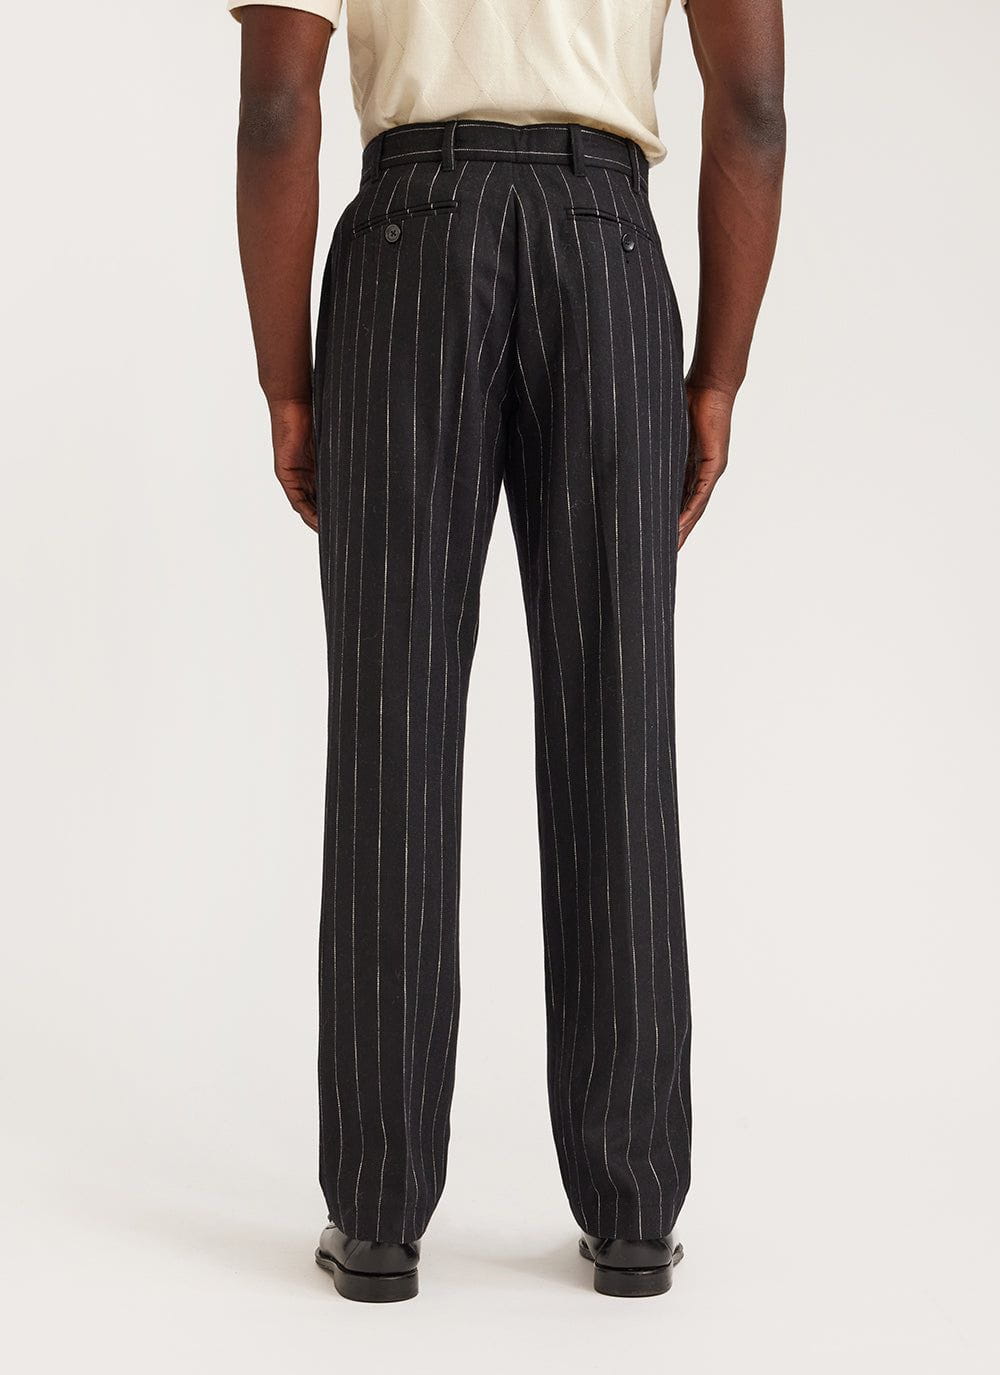 Buy stripes pants for men ankle length in India @ Limeroad